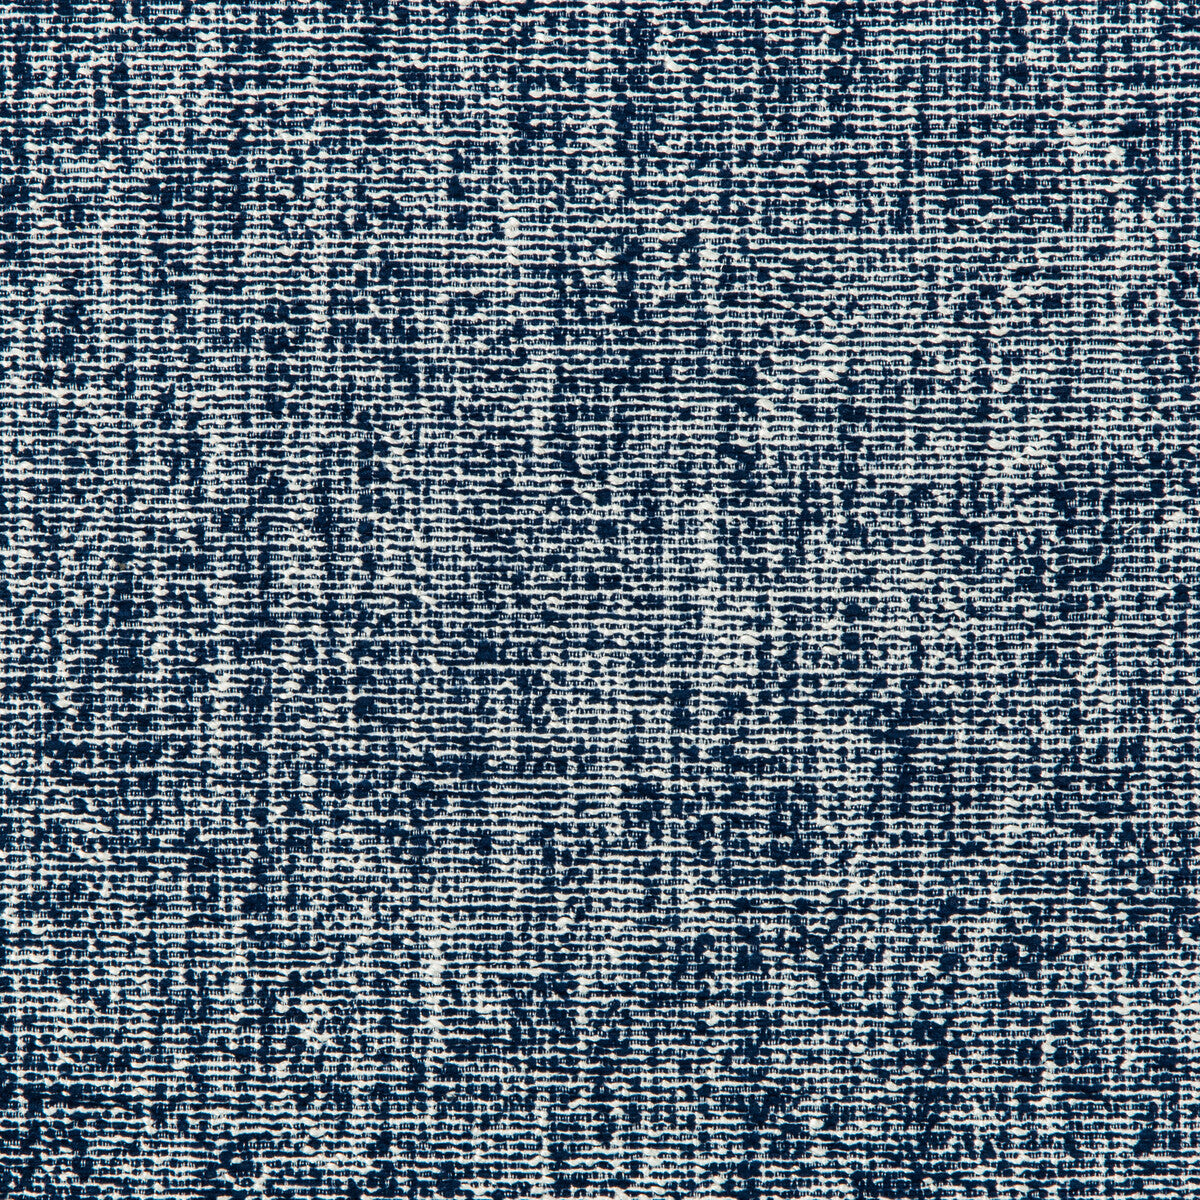 Kravet Design fabric in 36080-50 color - pattern 36080.50.0 - by Kravet Design in the Inside Out Performance Fabrics collection